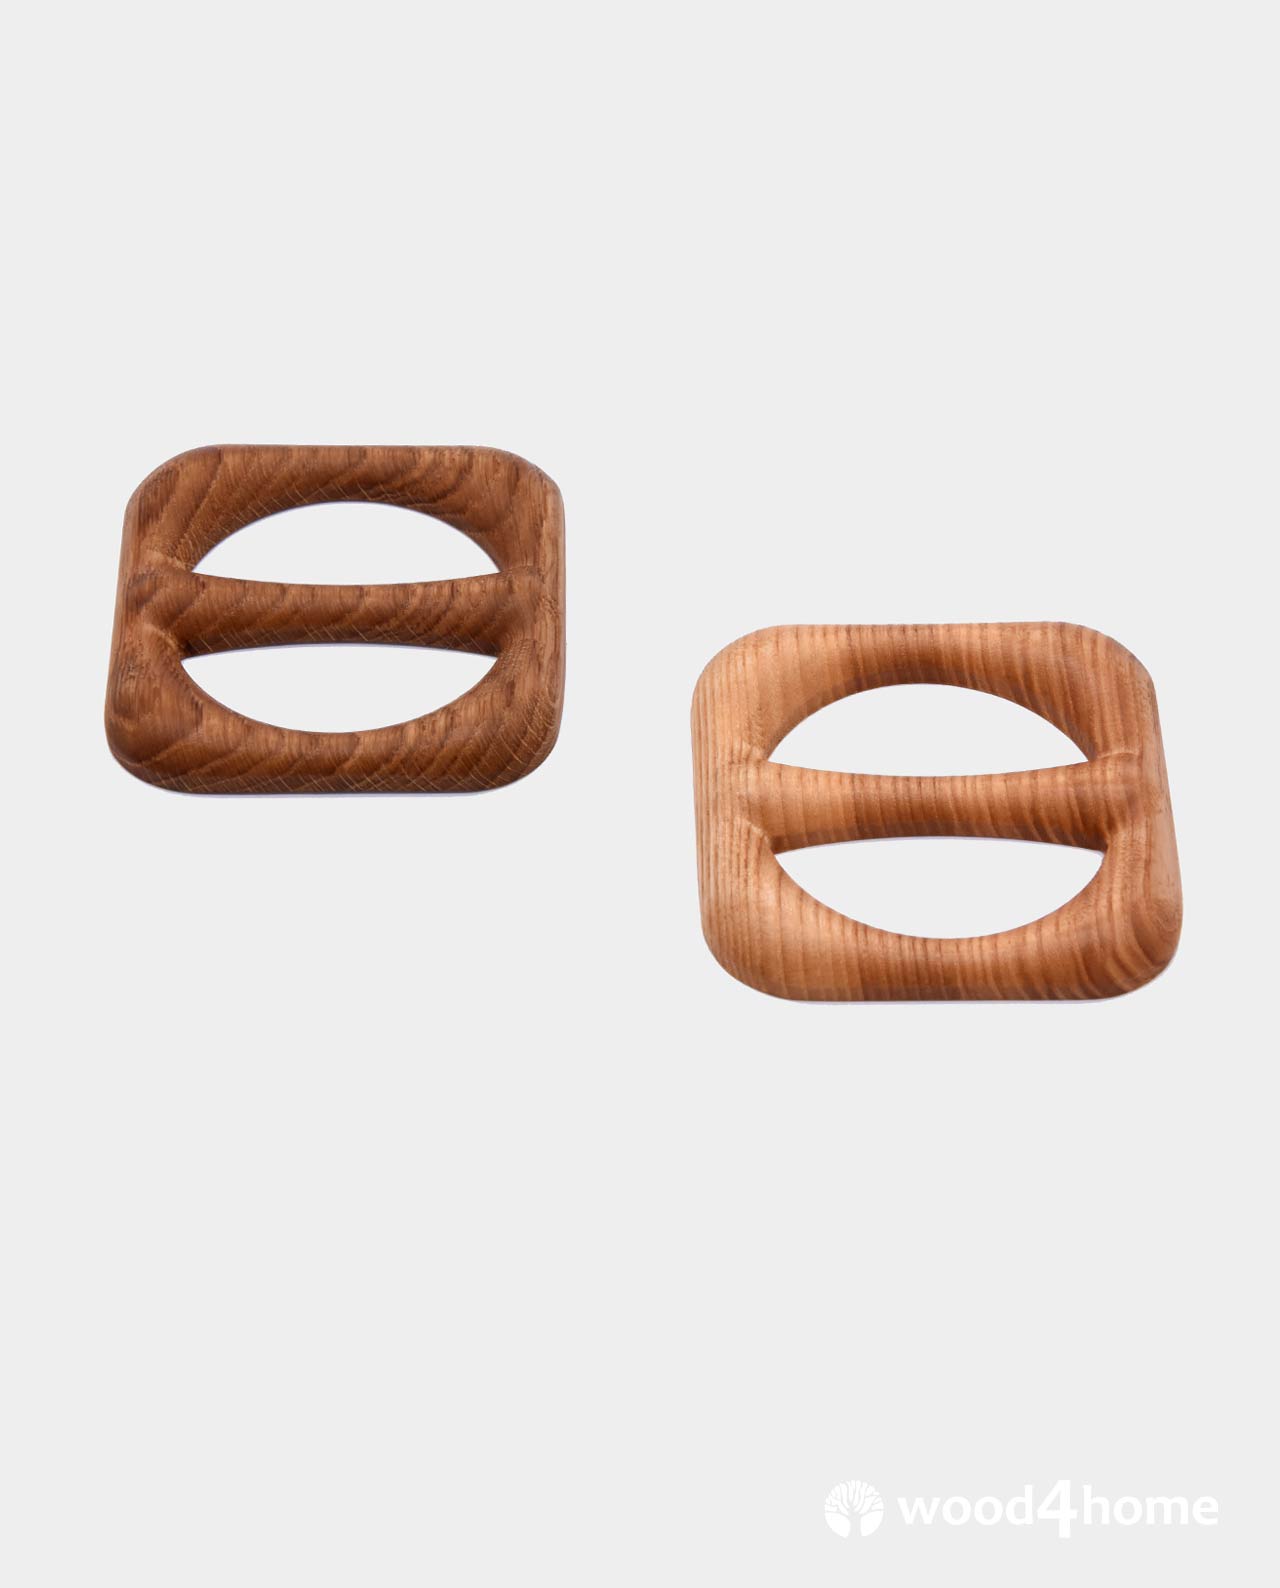 Shawl Clip Ring - Wood4home - Wooden Furnishings, Souvenirs, Jewelry, Toys